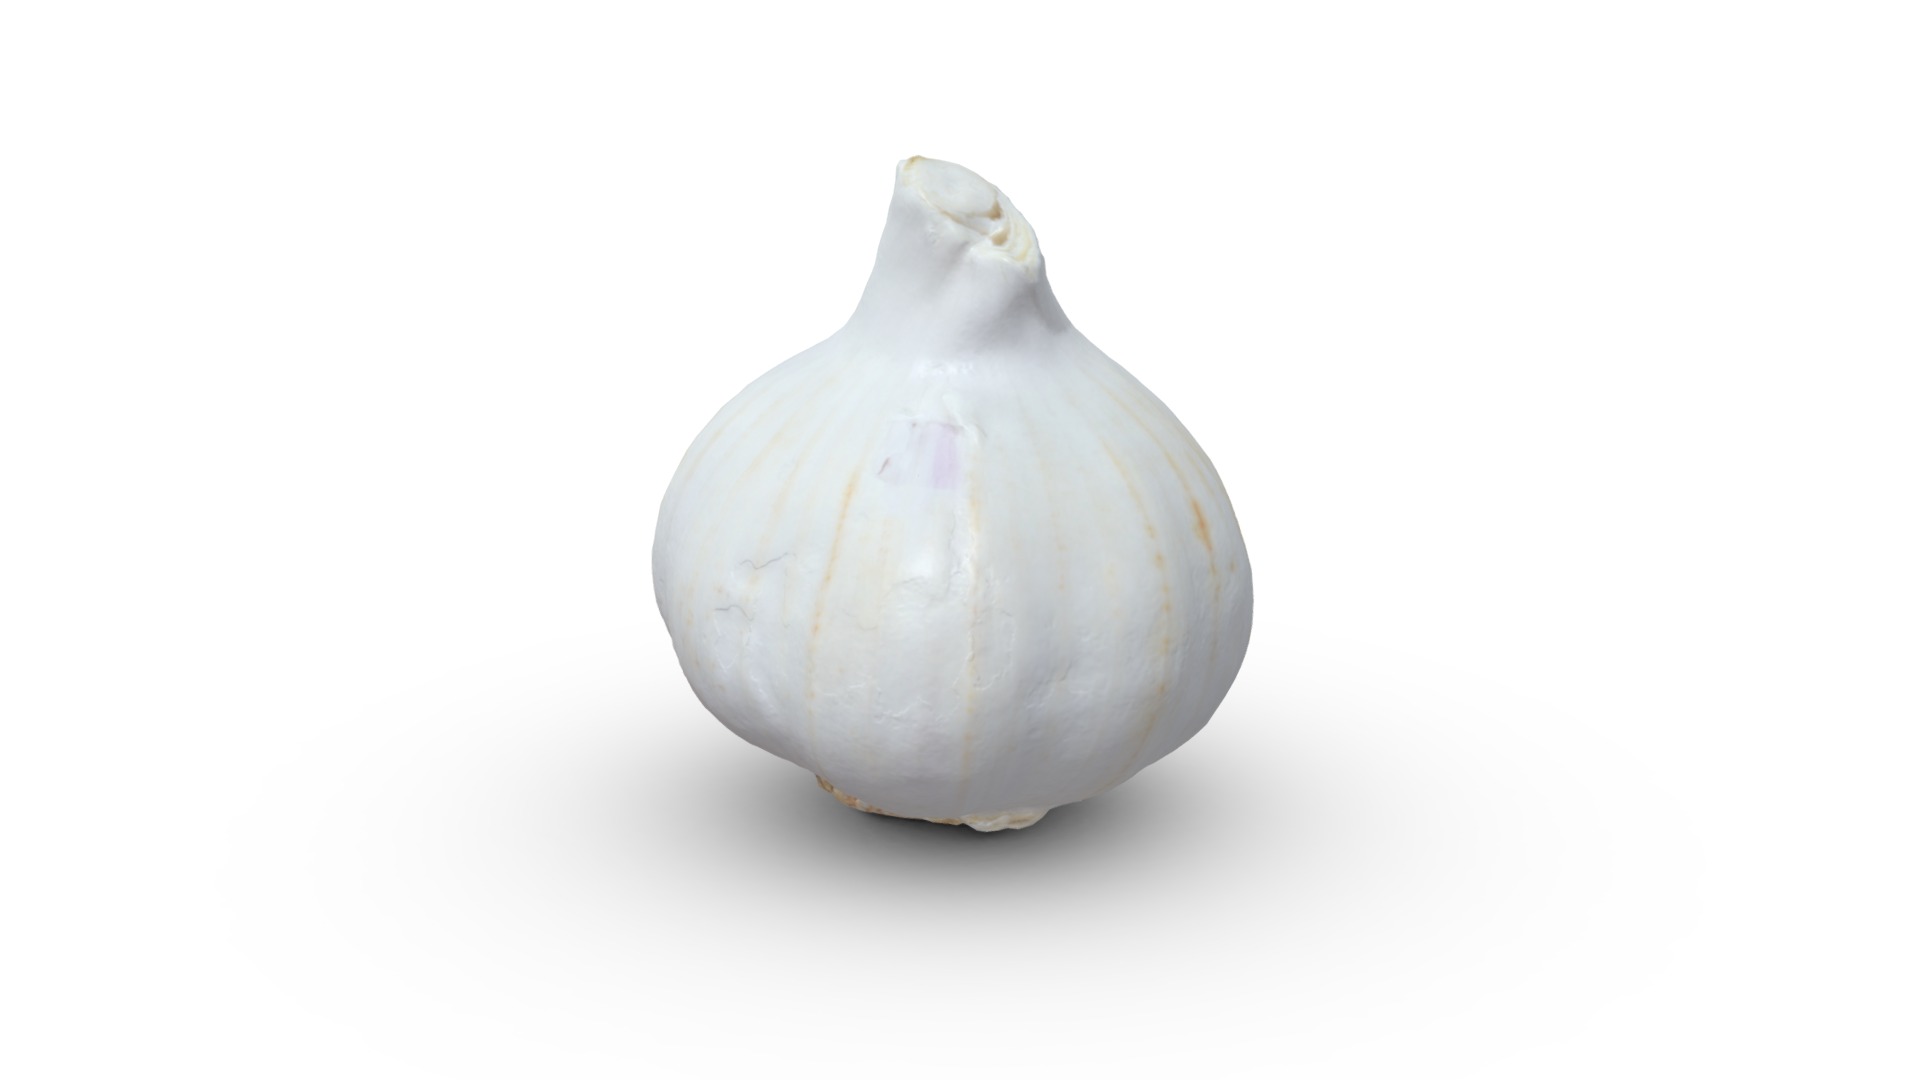 3D model Garlic Scan - This is a 3D model of the Garlic Scan. The 3D model is about a white and grey egg.